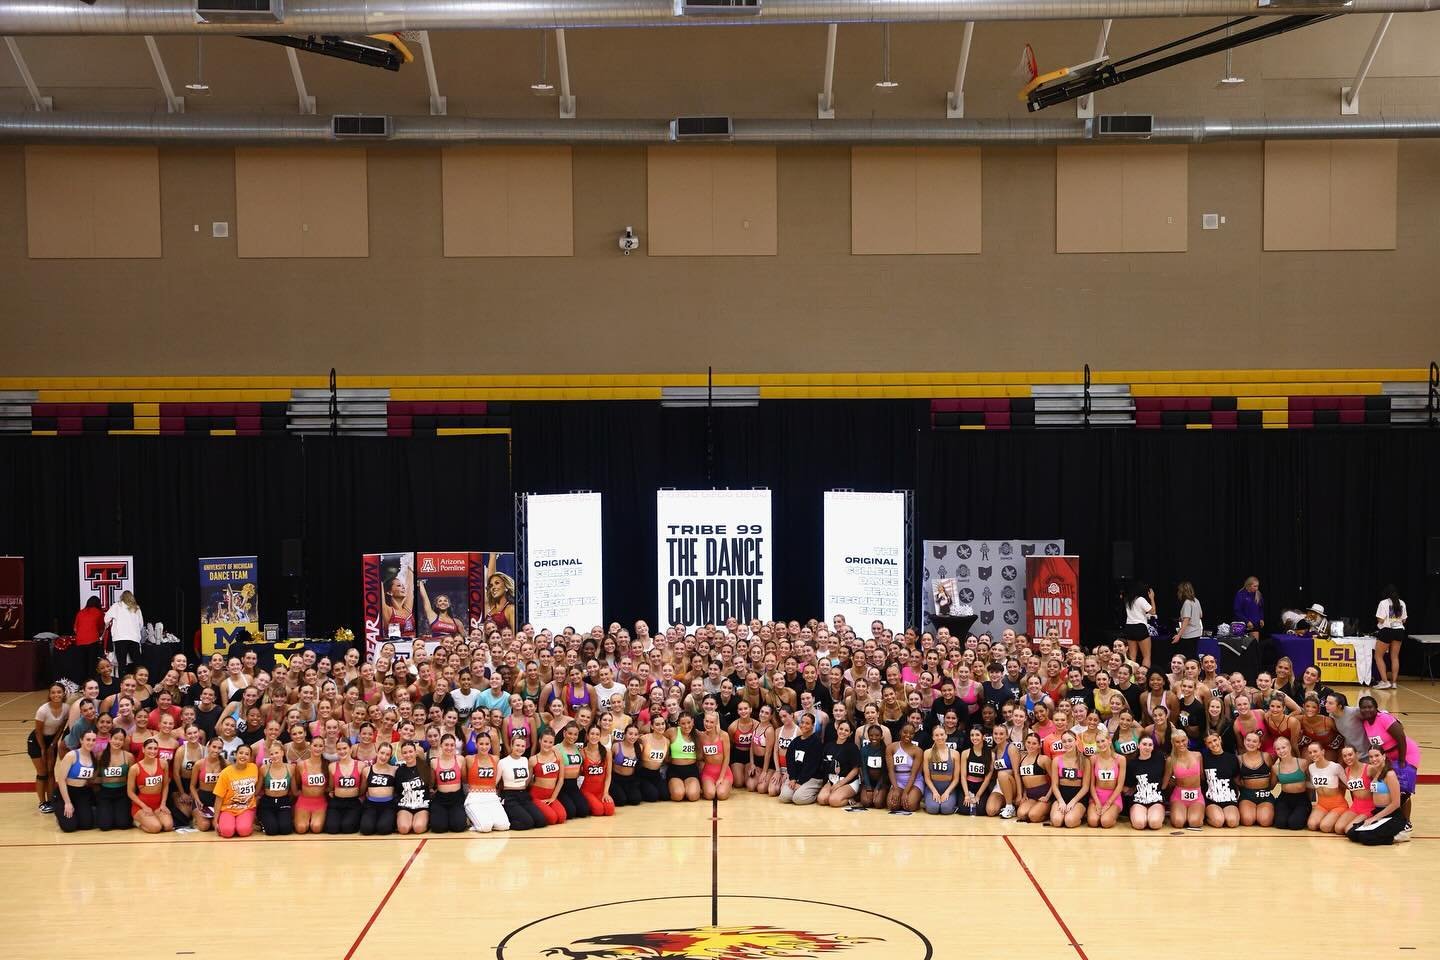 WE ARE STILL PROCESSING 🤩🔥

Sending out the BIGGEST THANK YOU to our TRIBE- the recruits, coaches, college dancers, production staff, TRIBE faculty, supportive parents, sponsors and any and everyone in between who made this event happen! ⚡️

We are